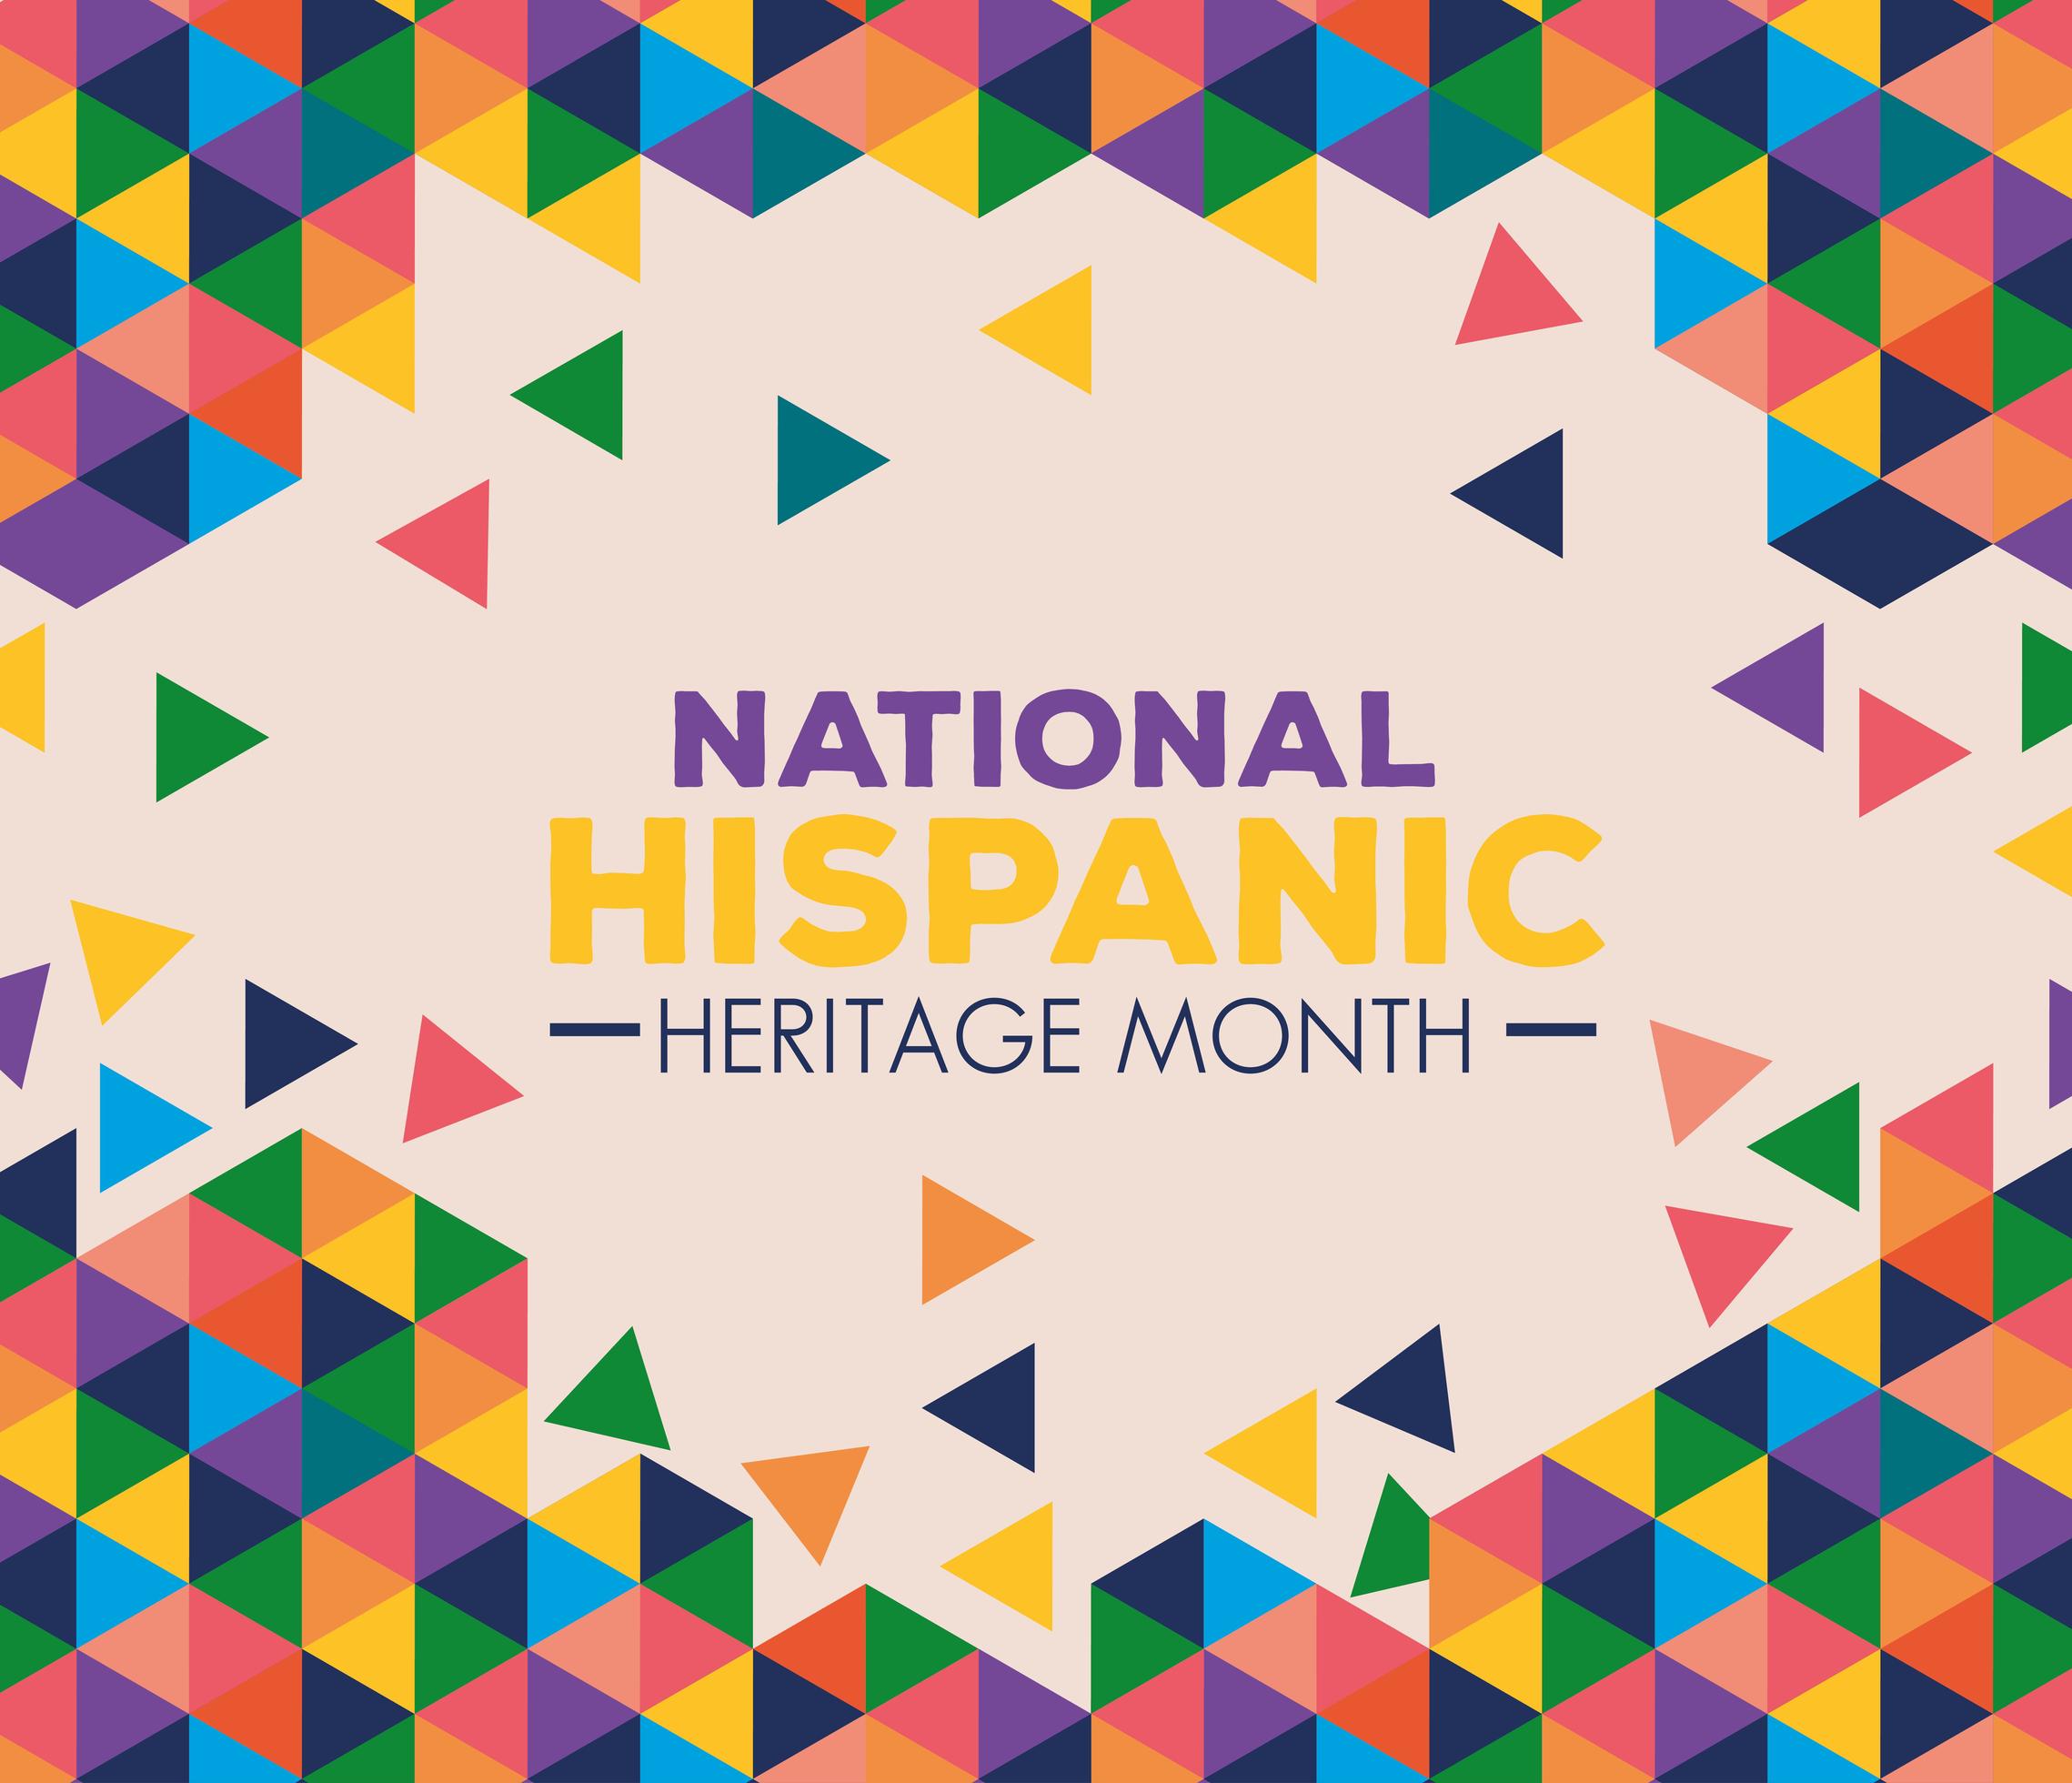 hispanic-heritage-month-banner-printable-free-change-colors-edit-text-or-add-images-and-videos